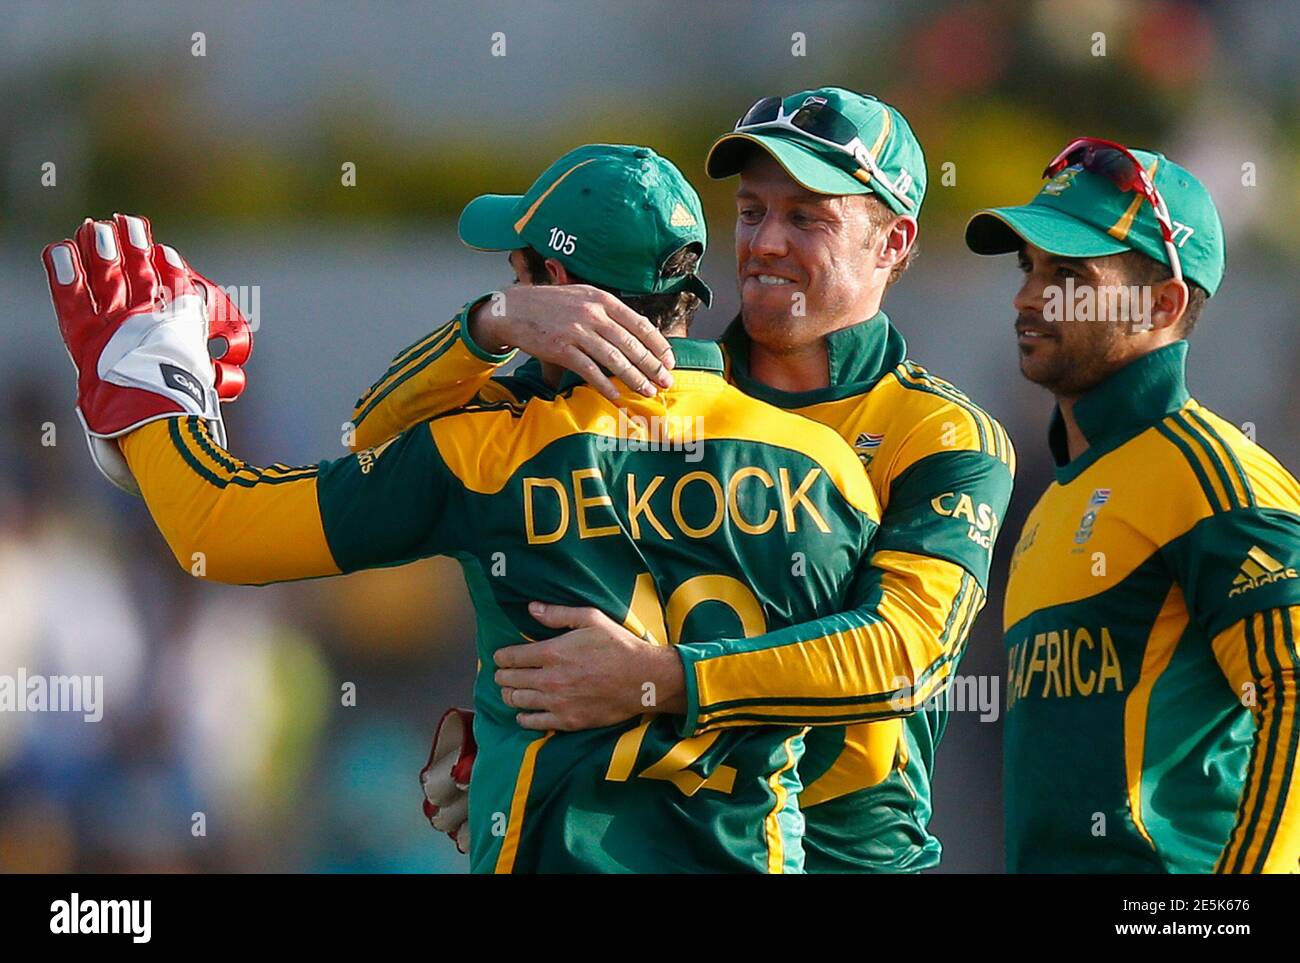 South Africa's captain AB de Villiers (C) celebrates dismissal of Sri Lanka's Ashan Priyanjan (not pictured) with teammates Quinton de Kock (12) and Jean-Paul Duminy (R) during their final One Day International cricket match in Hambantota July 12, 2014. REUTERS/Dinuka Liyanawatte (SRI LANKA - Tags: SPORT CRICKET) Stock Photo